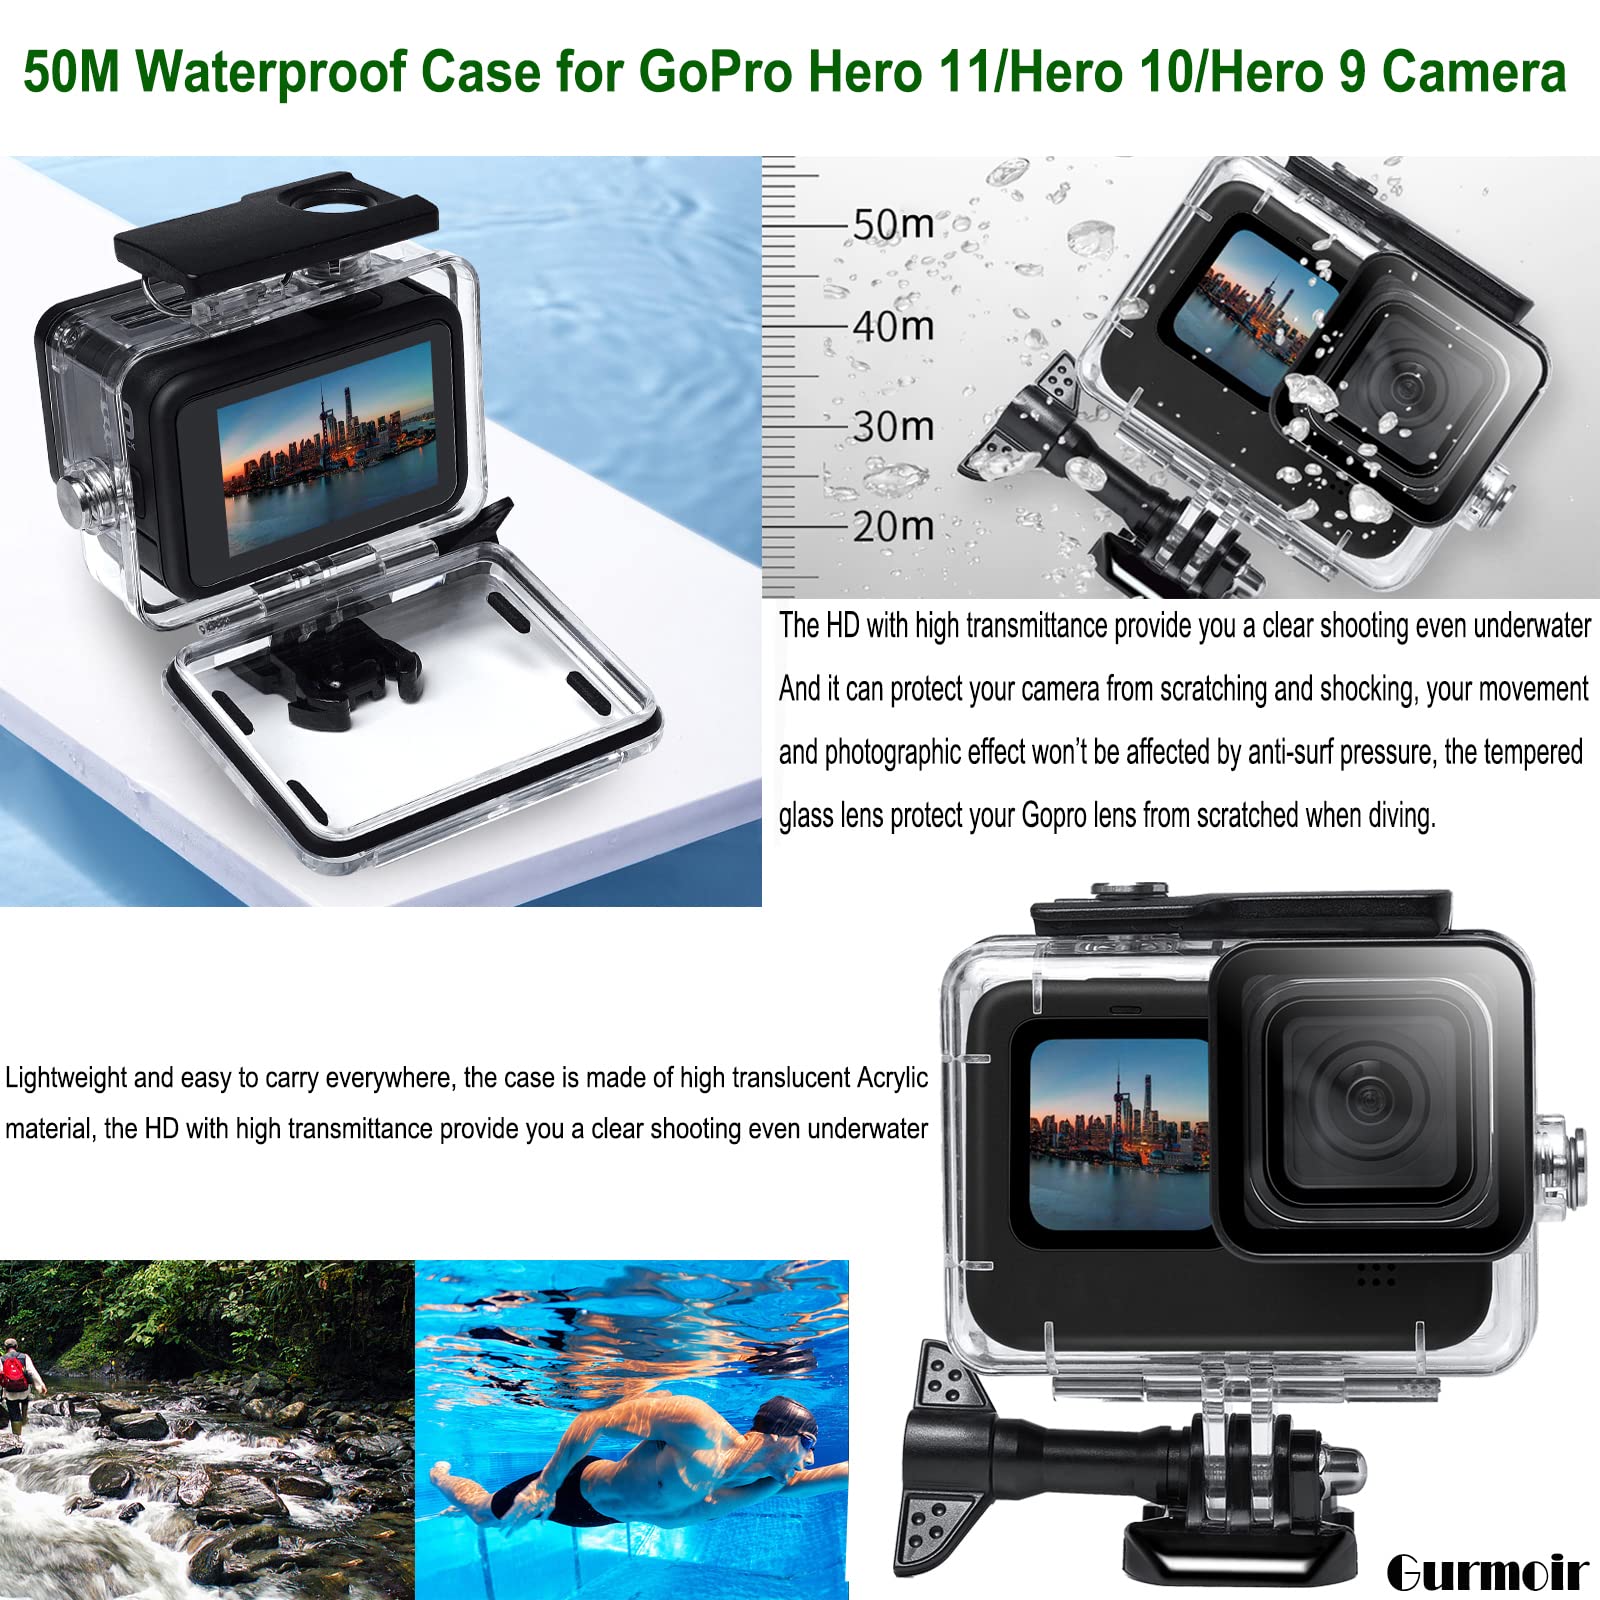 Gurmoir Accessories Kit with Battery and Charger for Gopro Hero 11 10 9 Black. Waterproof Housing Case+Selfie Stick+Tripod+2 Battery+3-Channel Charger Station Compatible with Go Pro 11 10 9(PT09)